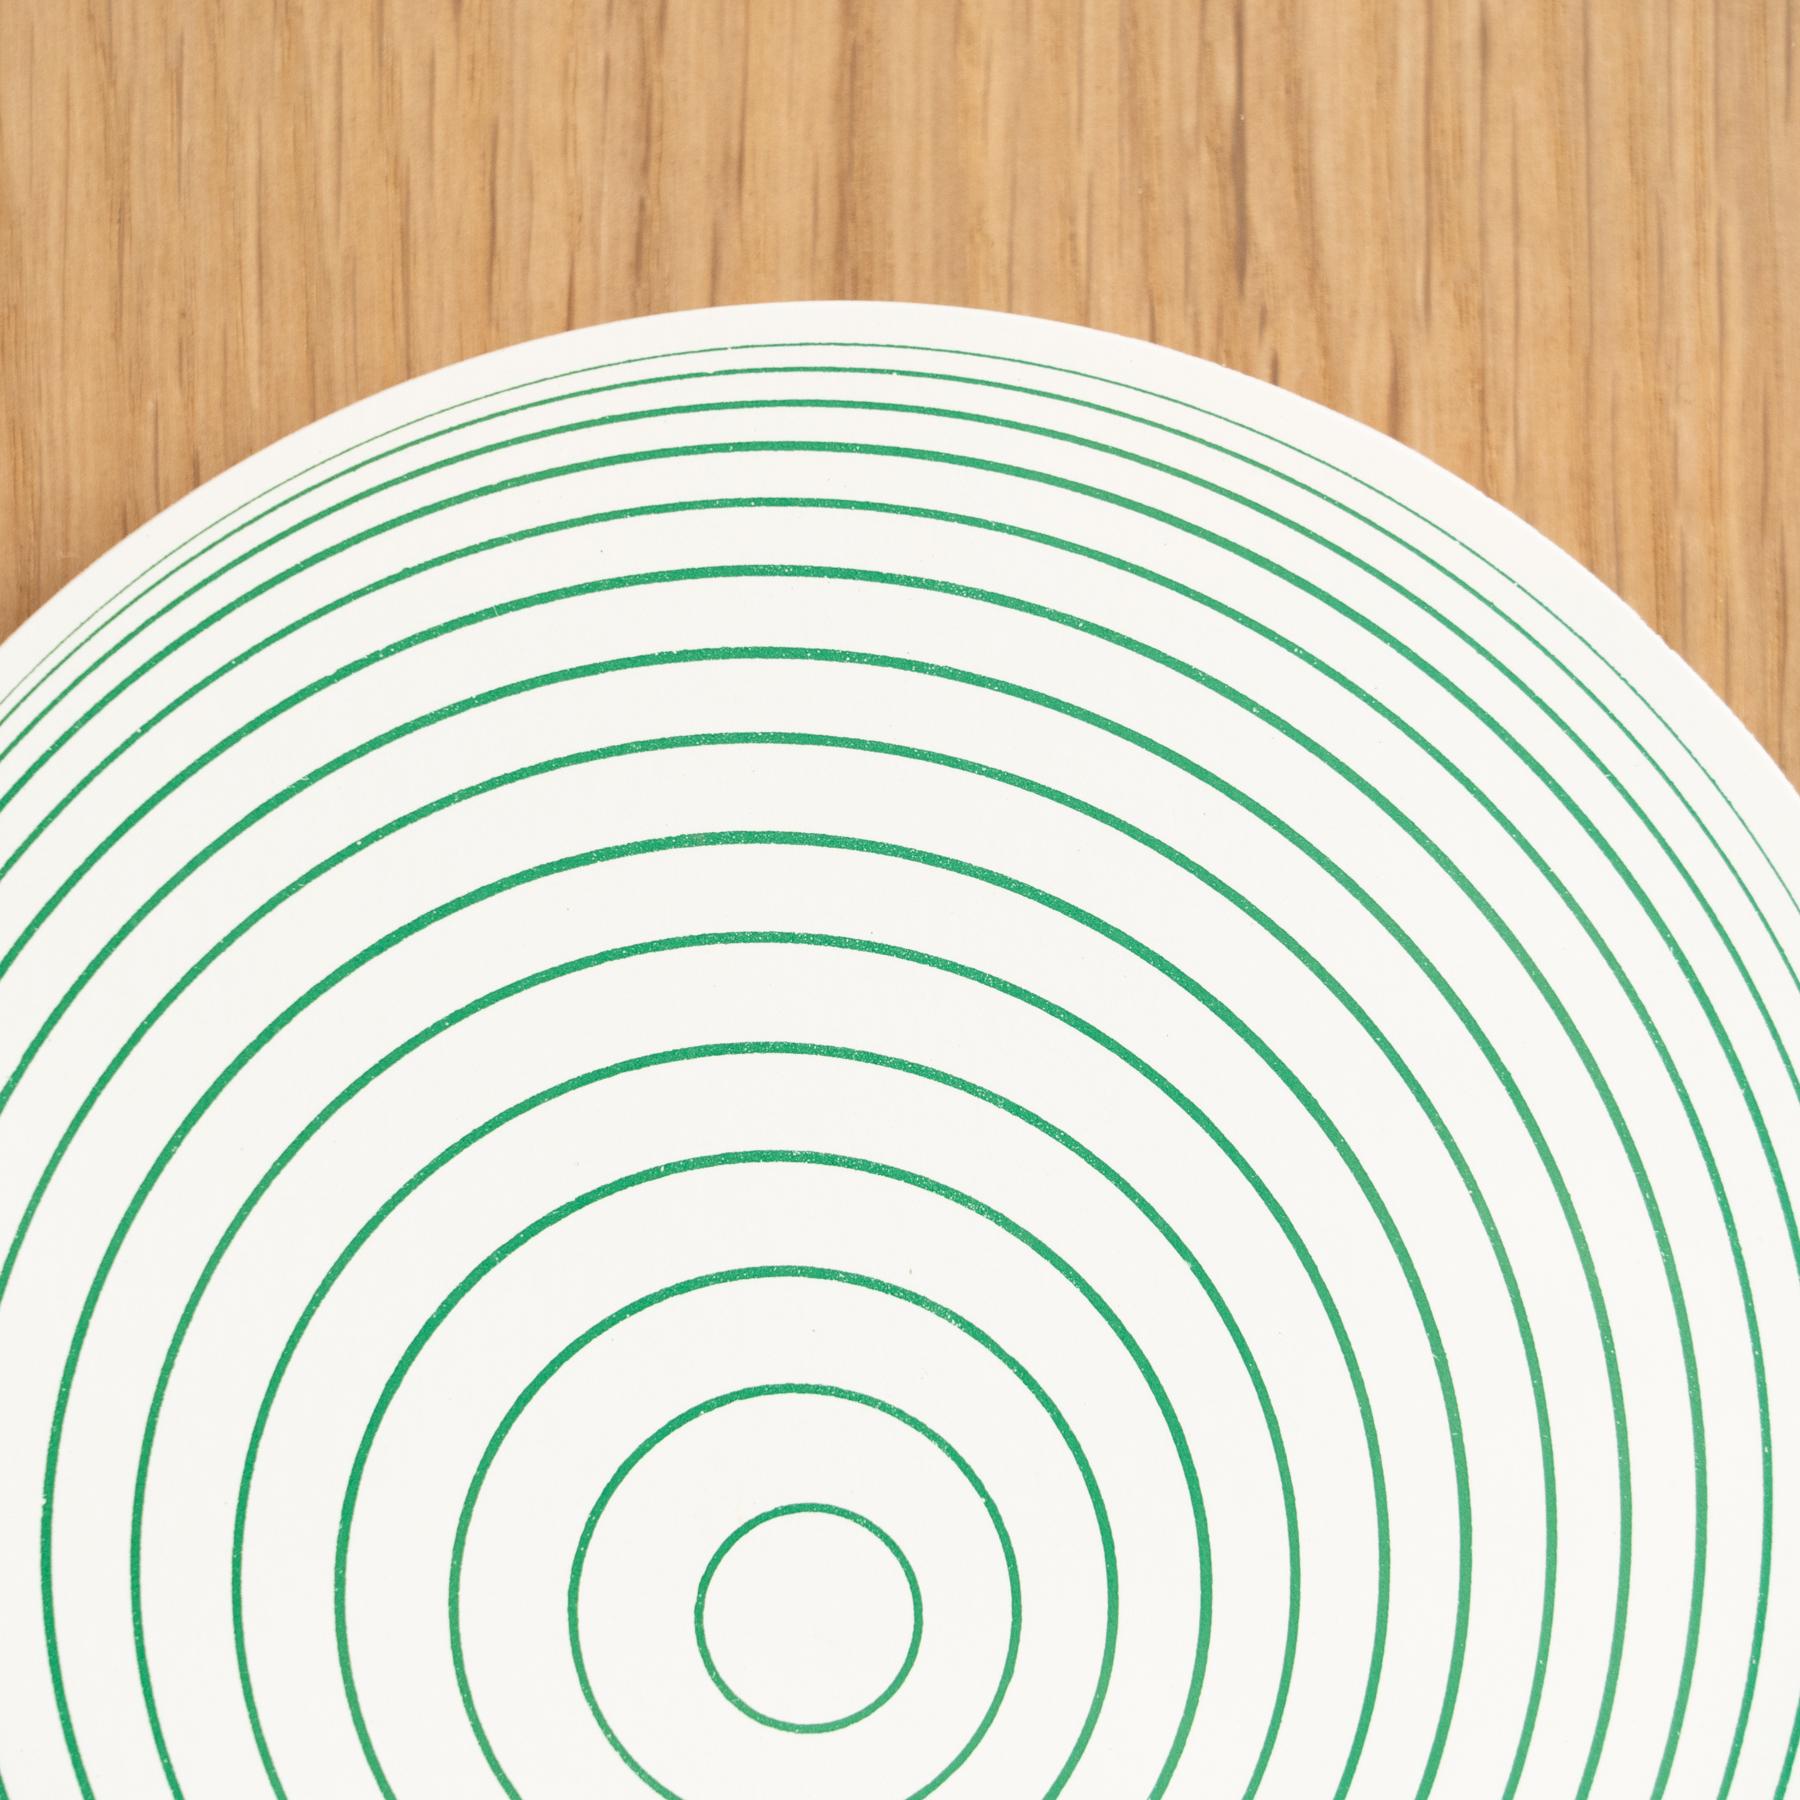 Late 20th Century Marcel Duchamp Green and White Cage Rotorelief by Konig Series 133, 1987 For Sale